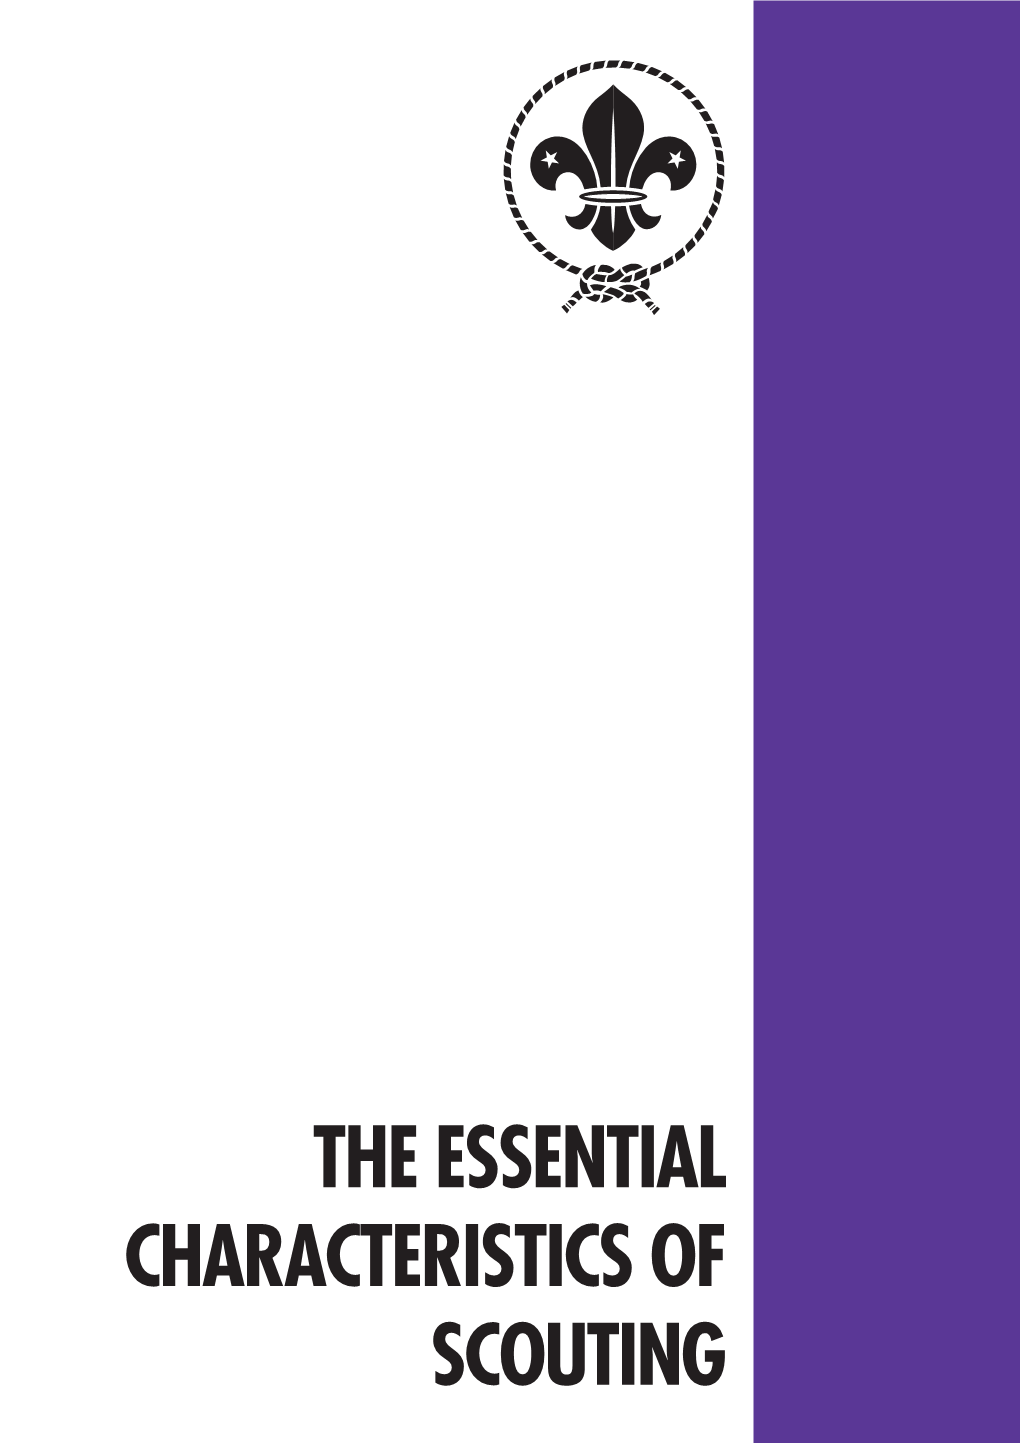 THE ESSENTIAL CHARACTERISTICS of SCOUTING World Organization of the Scout Movement Organisation Mondiale Du Mouvement Scout